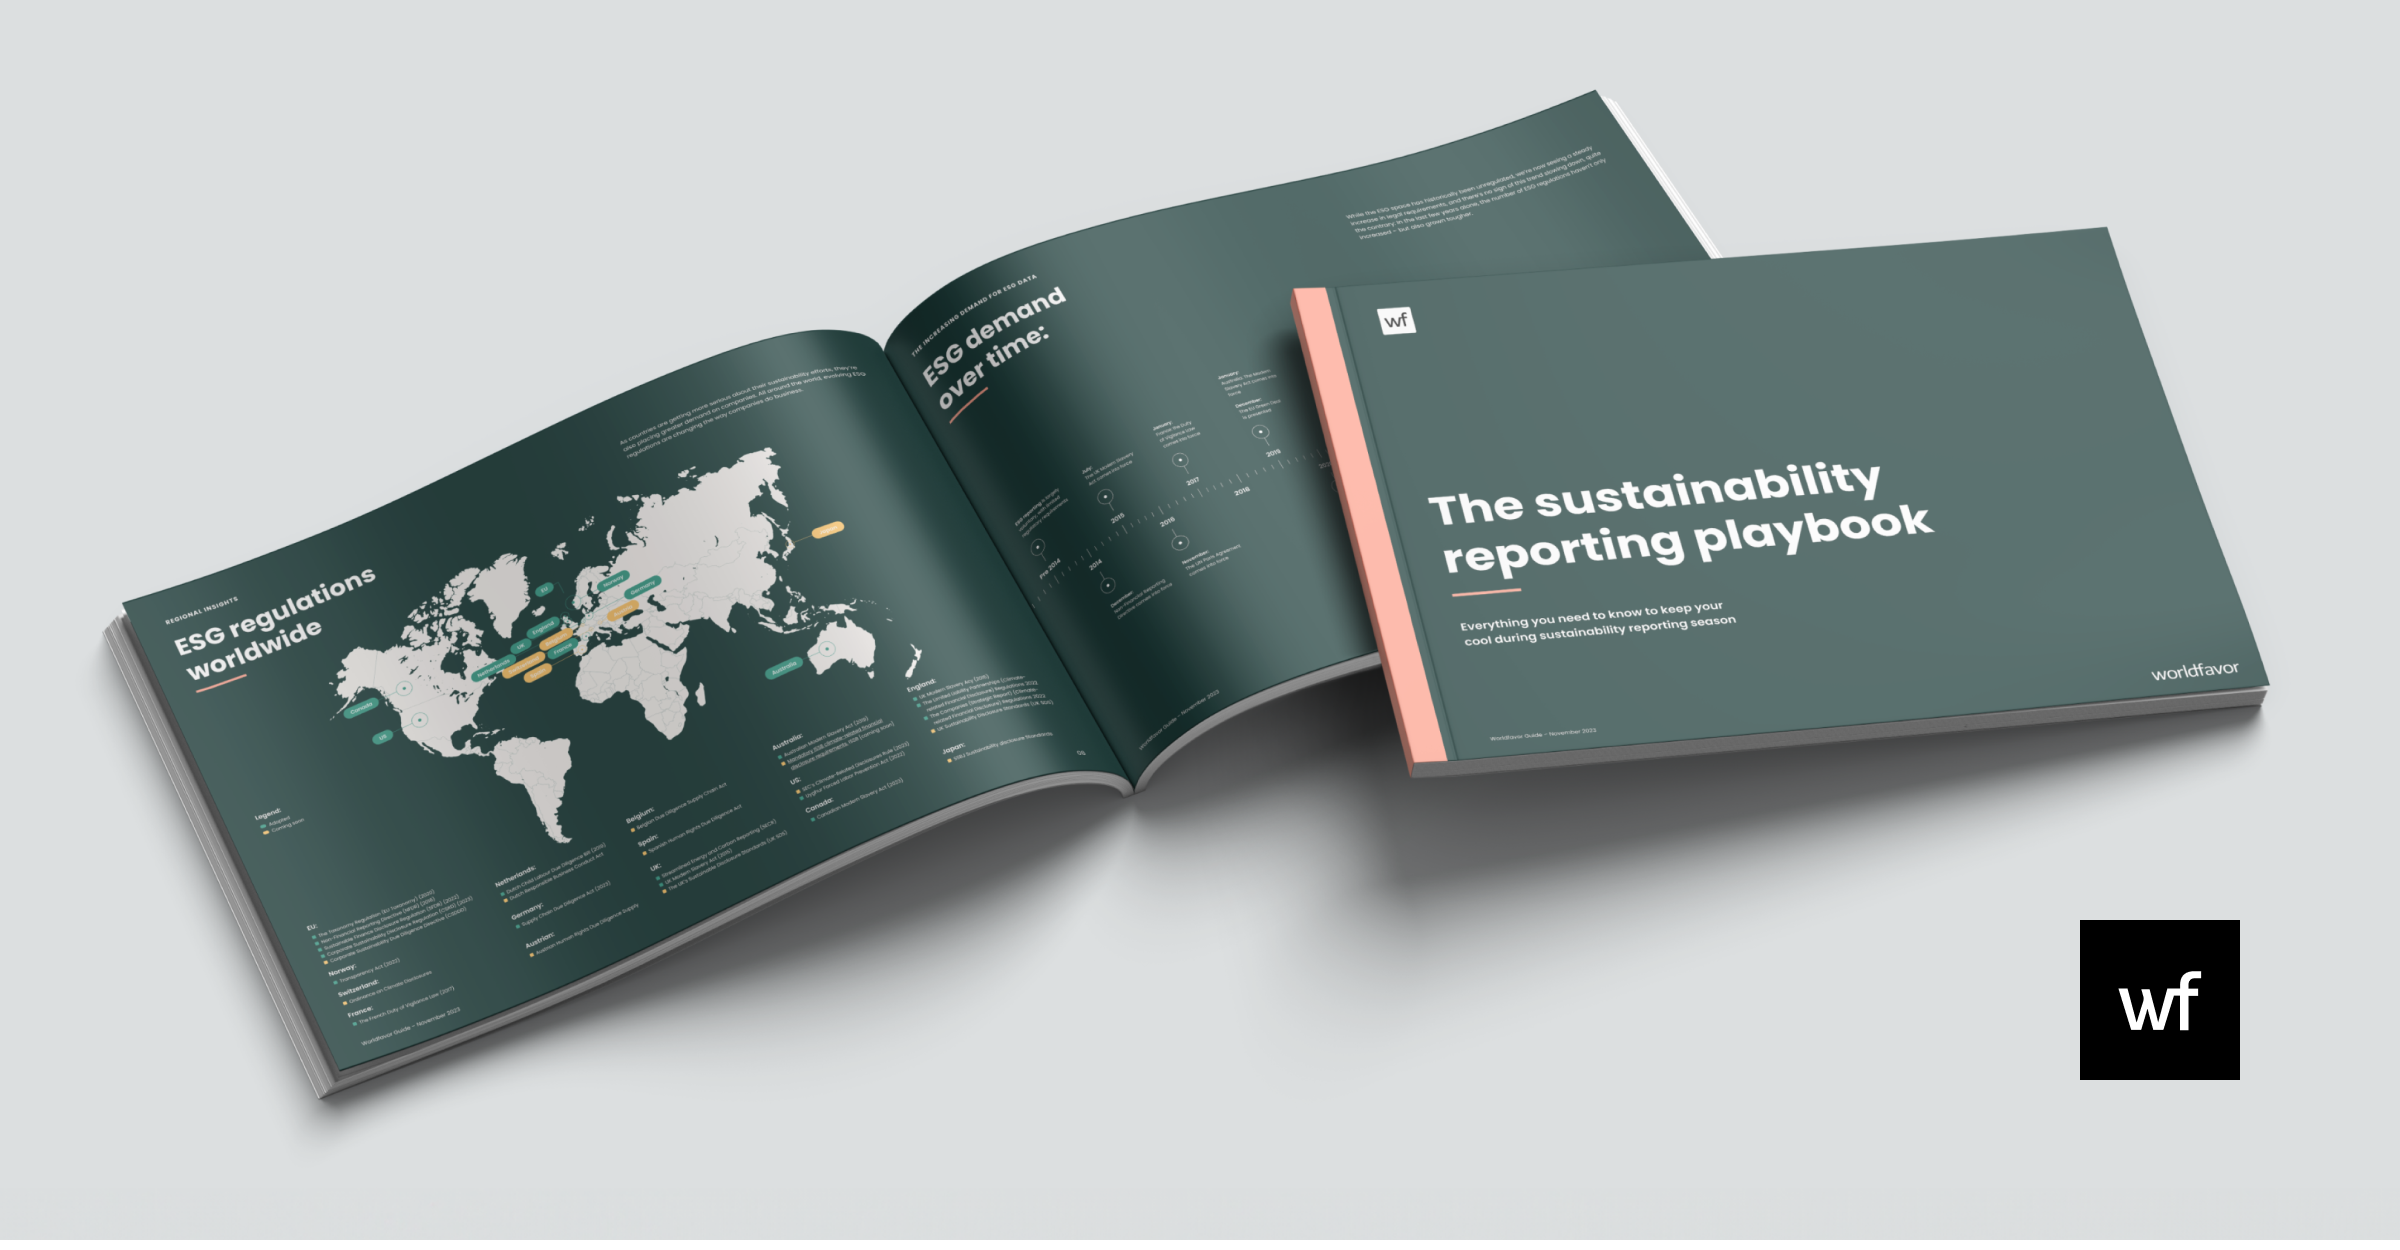 Worldfavor is launching a Sustainability Reporting Playbook to assist businesses in reporting their sustainability initiatives more effectively